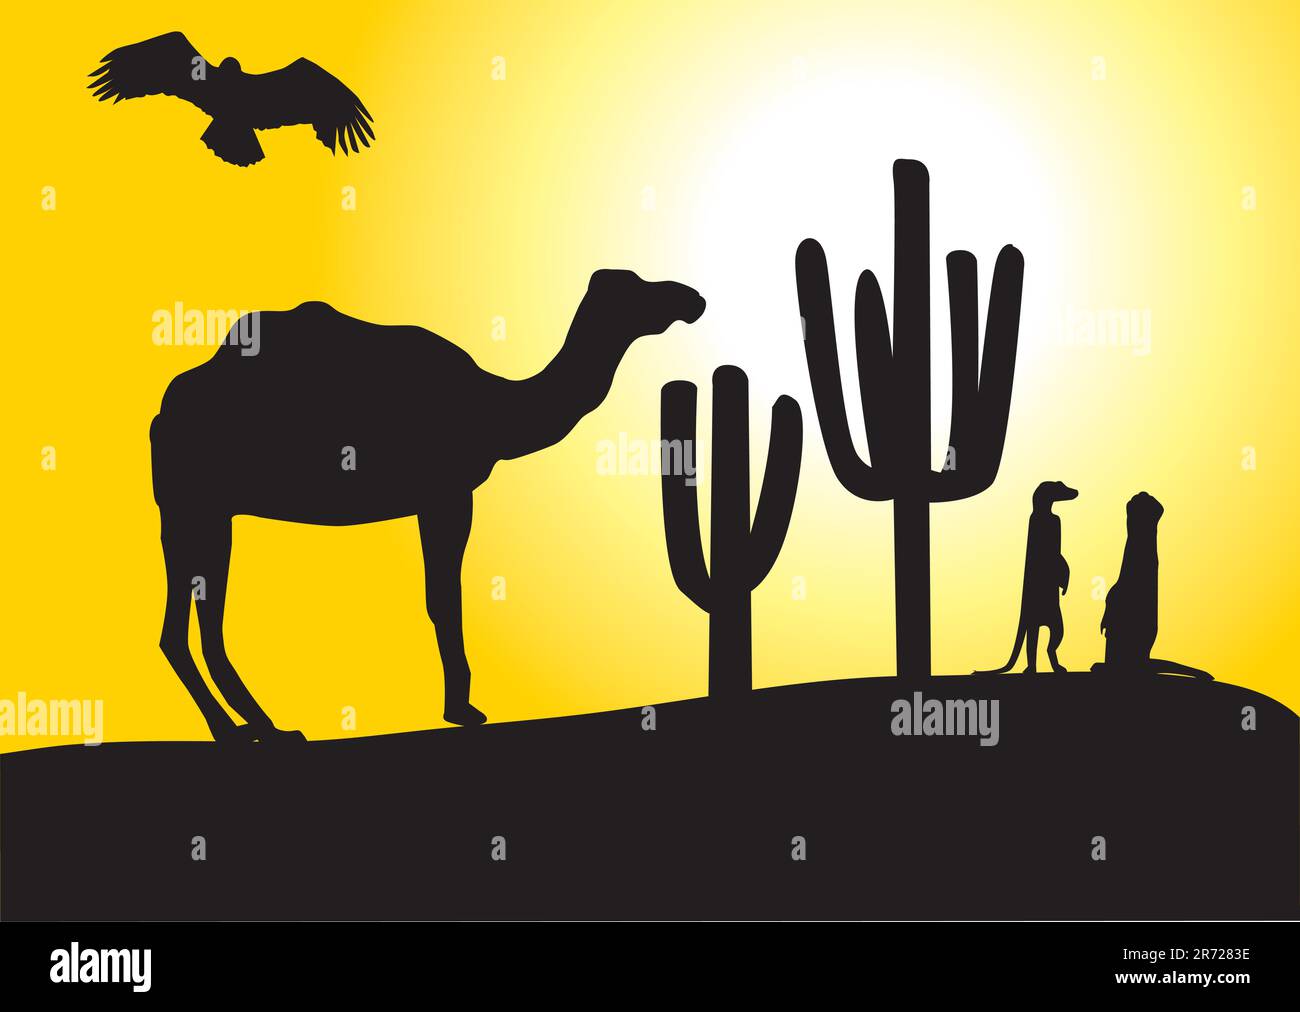 vector illustration of desert with camel.eagle and meer cats Stock Vector